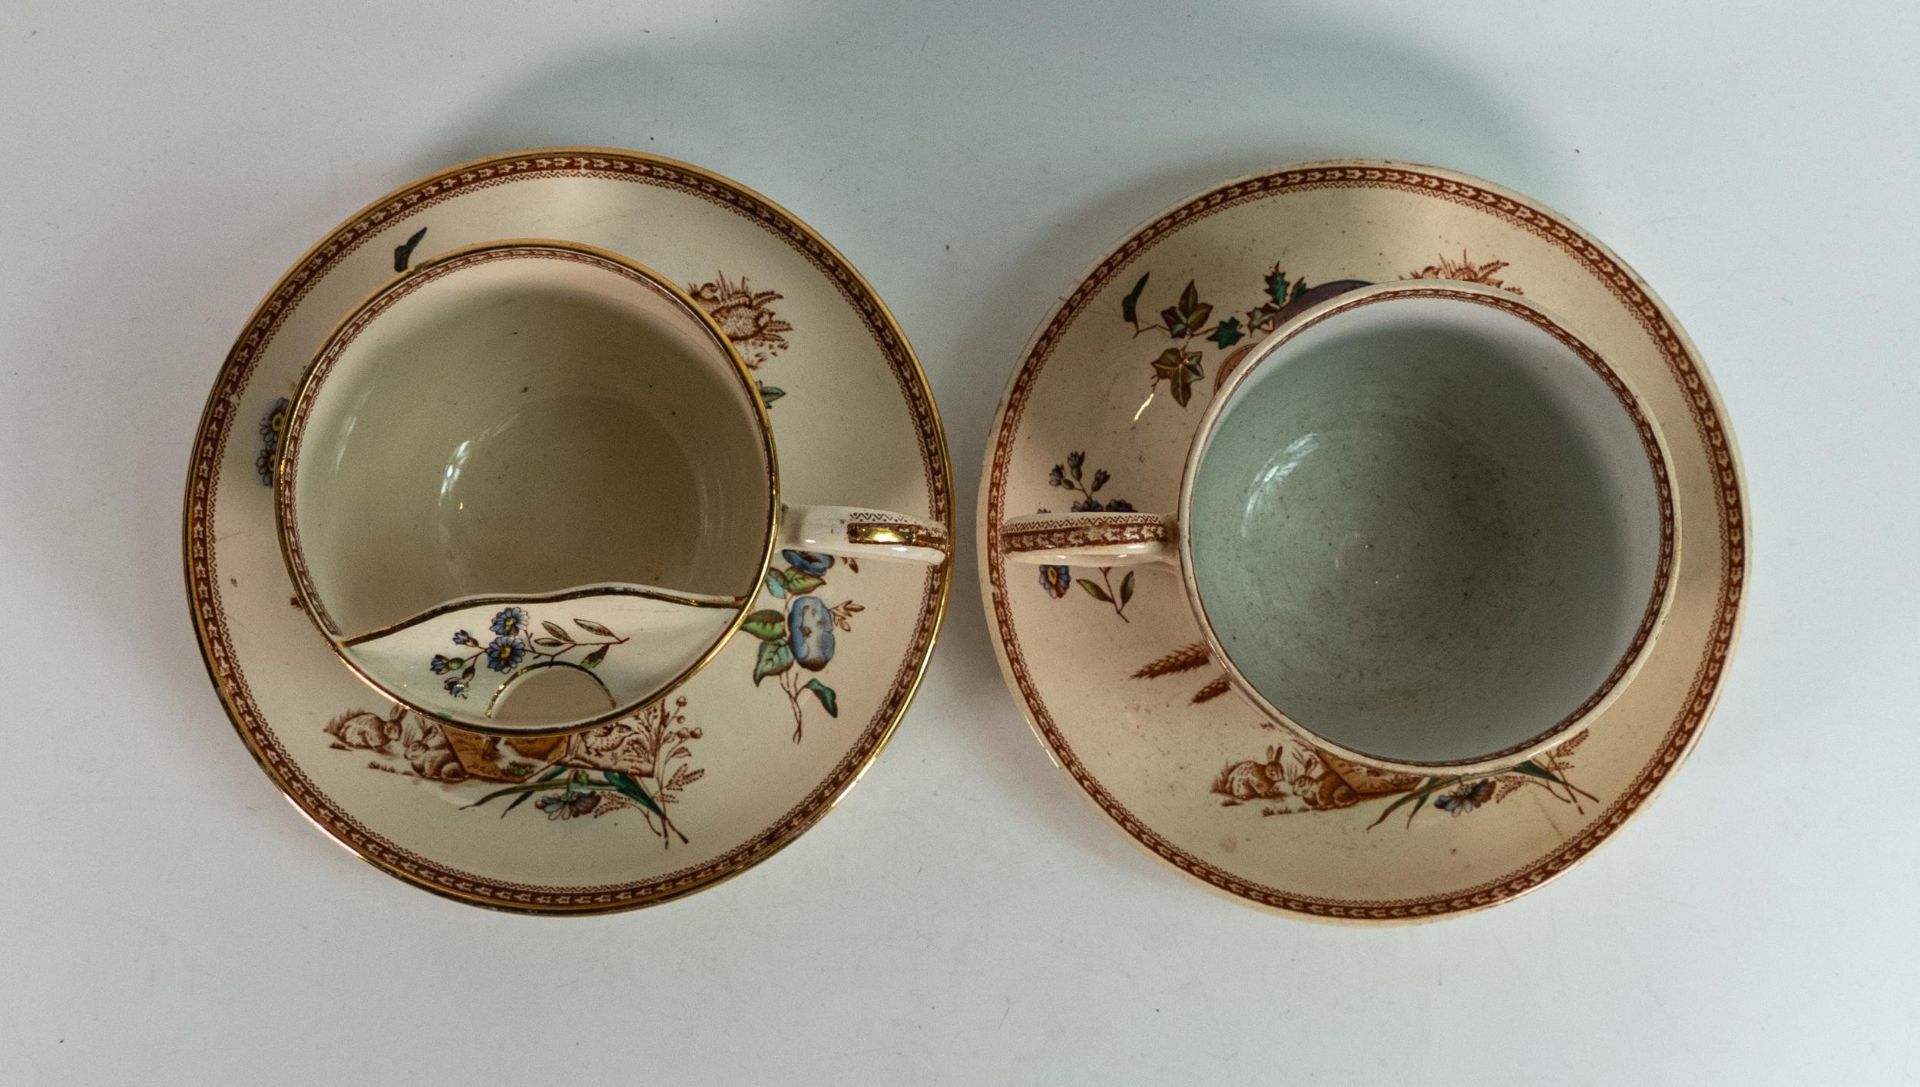 J.F wileman Mammoth cup & saucer, four seasons pattern with mammoth moustache cup and saucer ( - Image 4 of 4